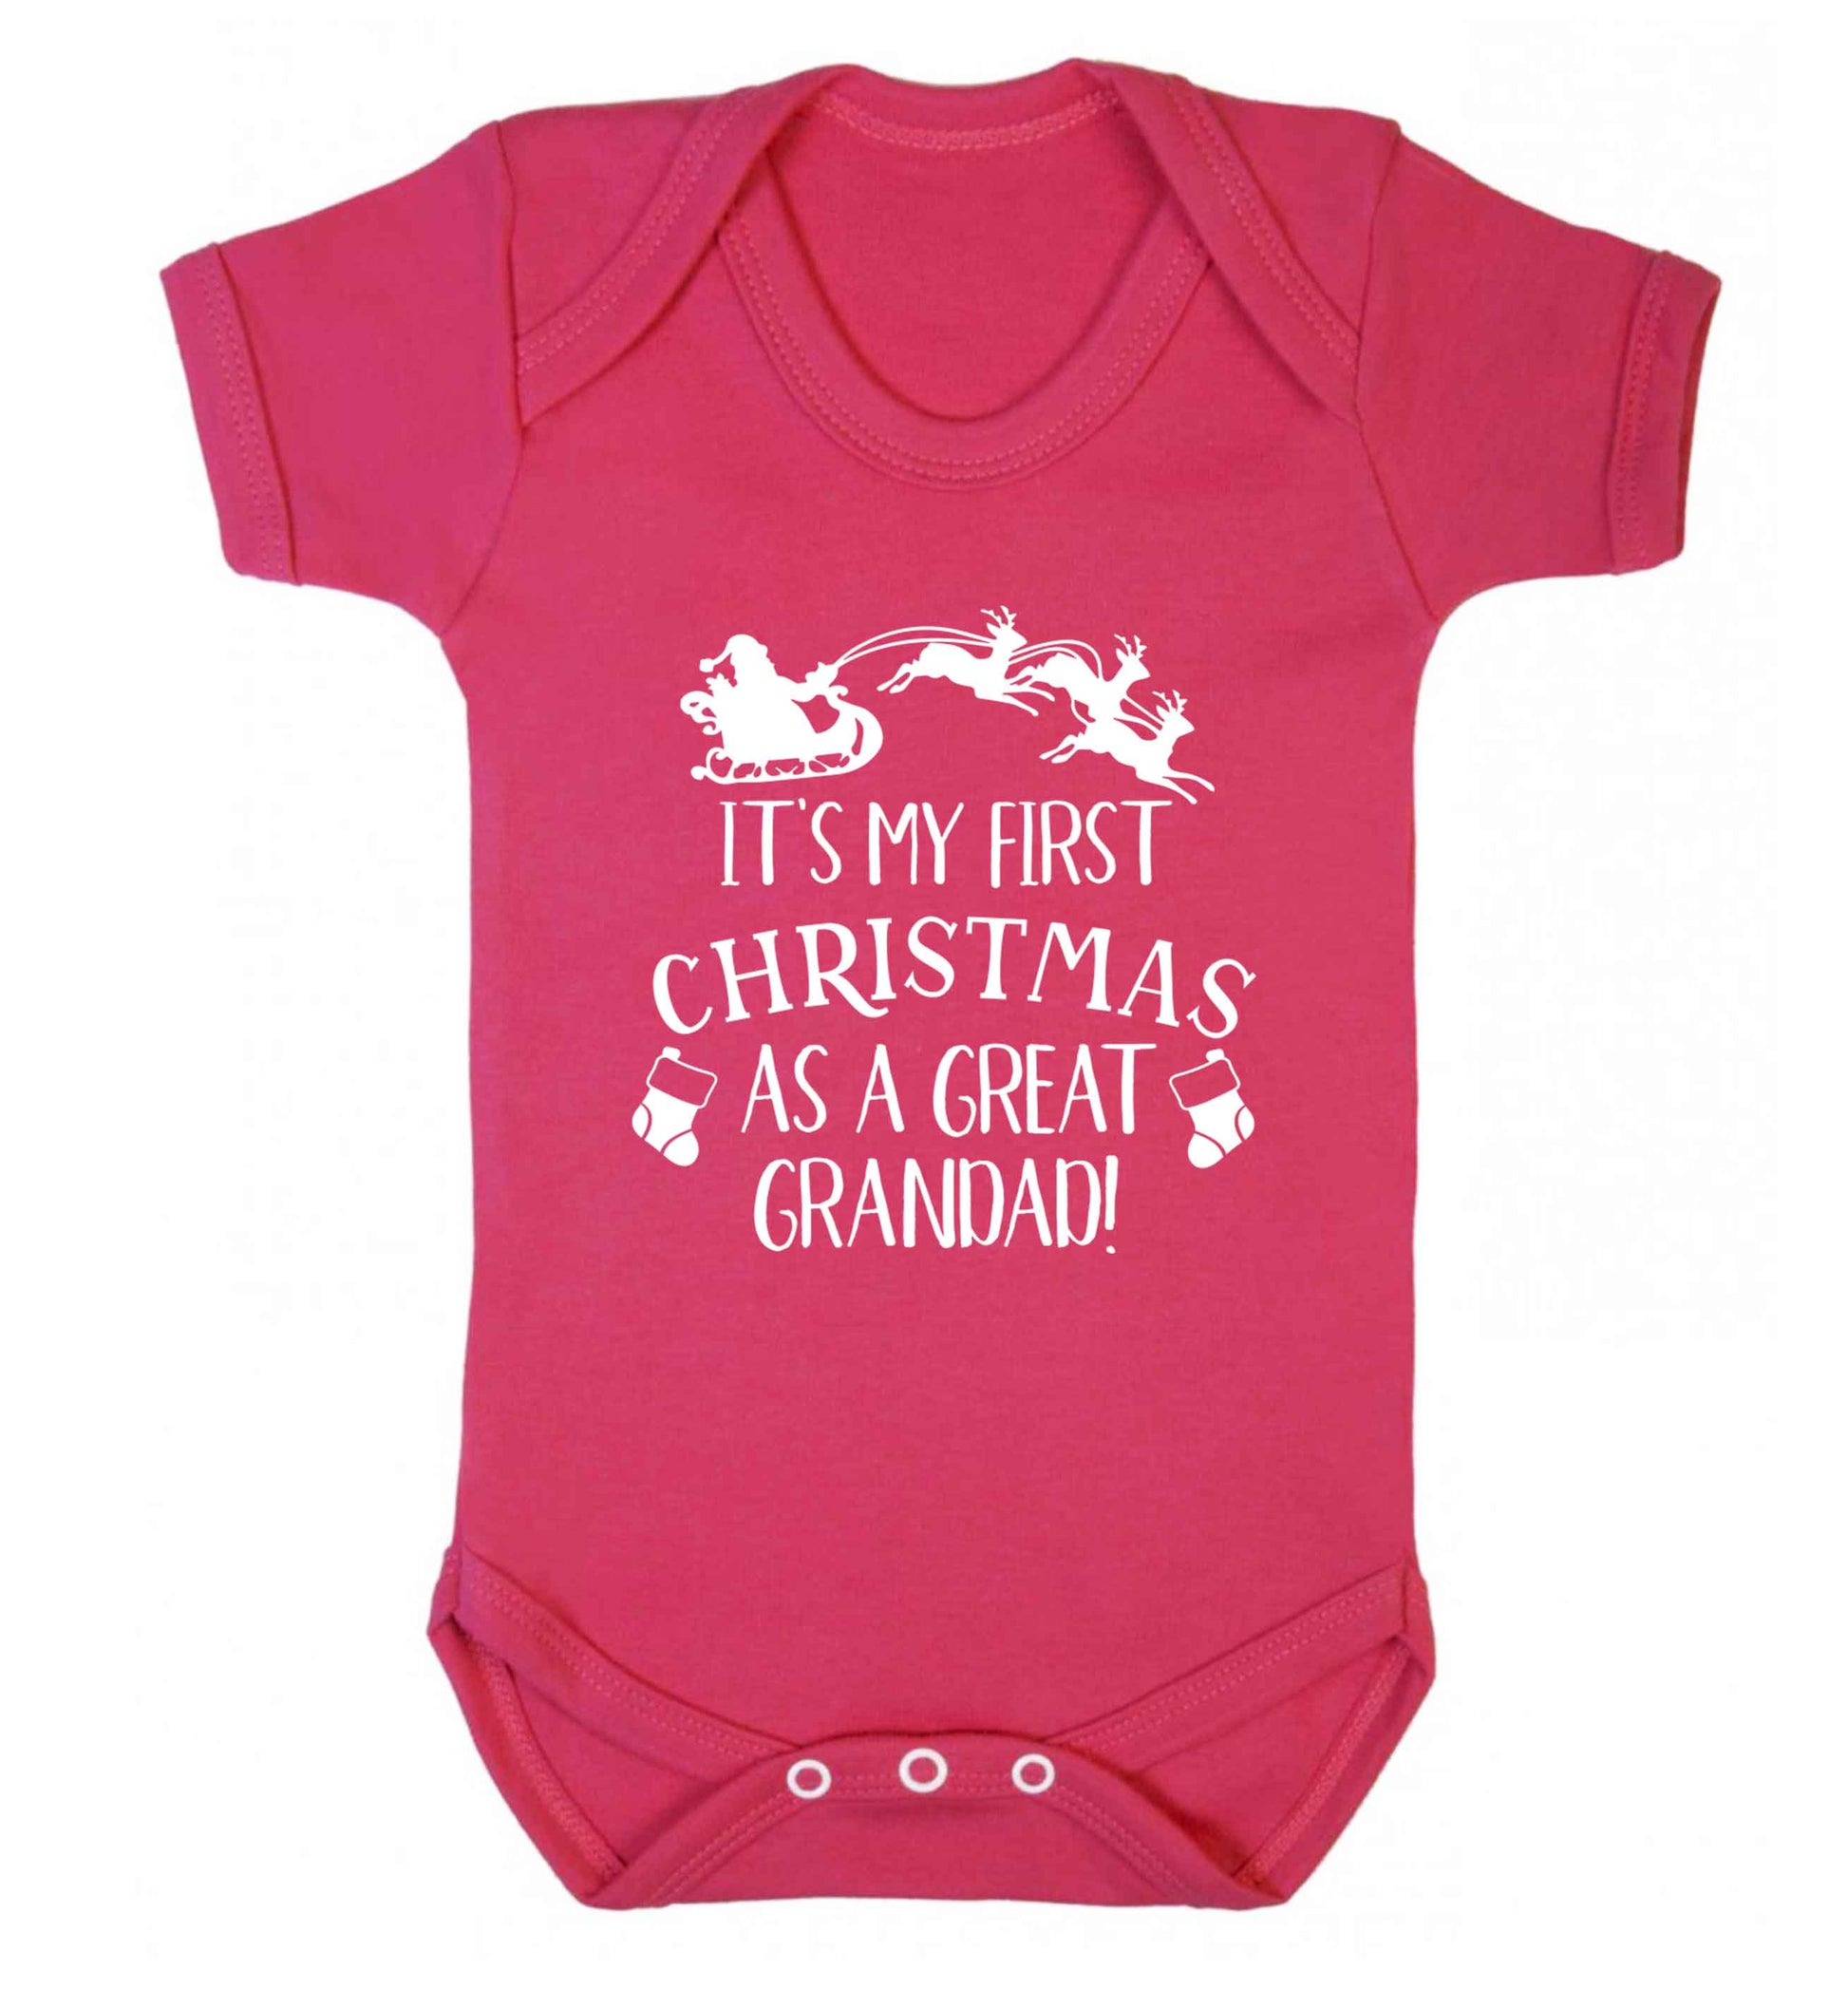 It's my first Christmas as a great grandad! Baby Vest dark pink 18-24 months